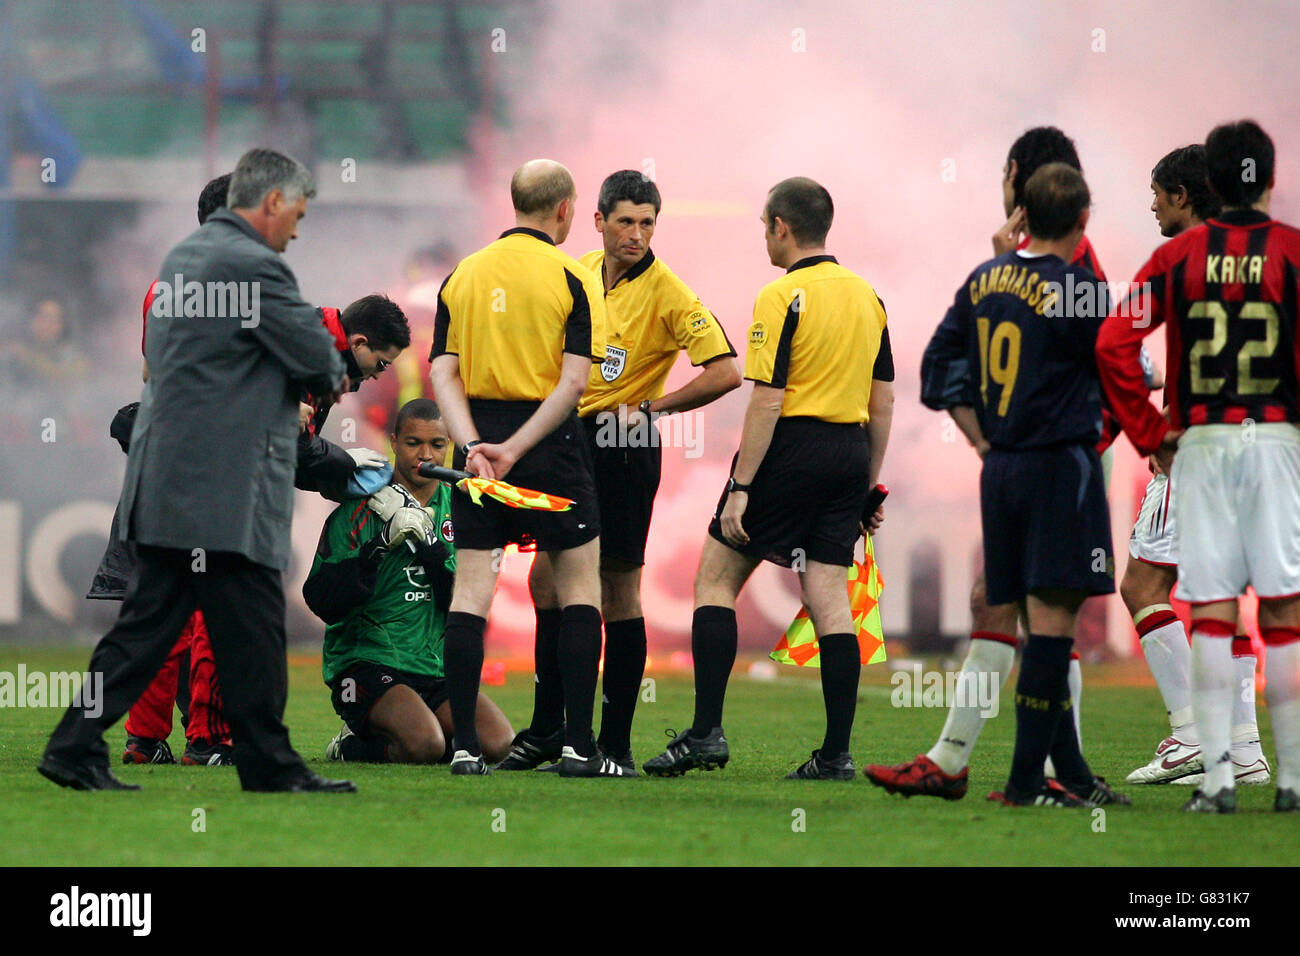 Referee Markus Merk decides to take the players off the field after flares  and bottles were